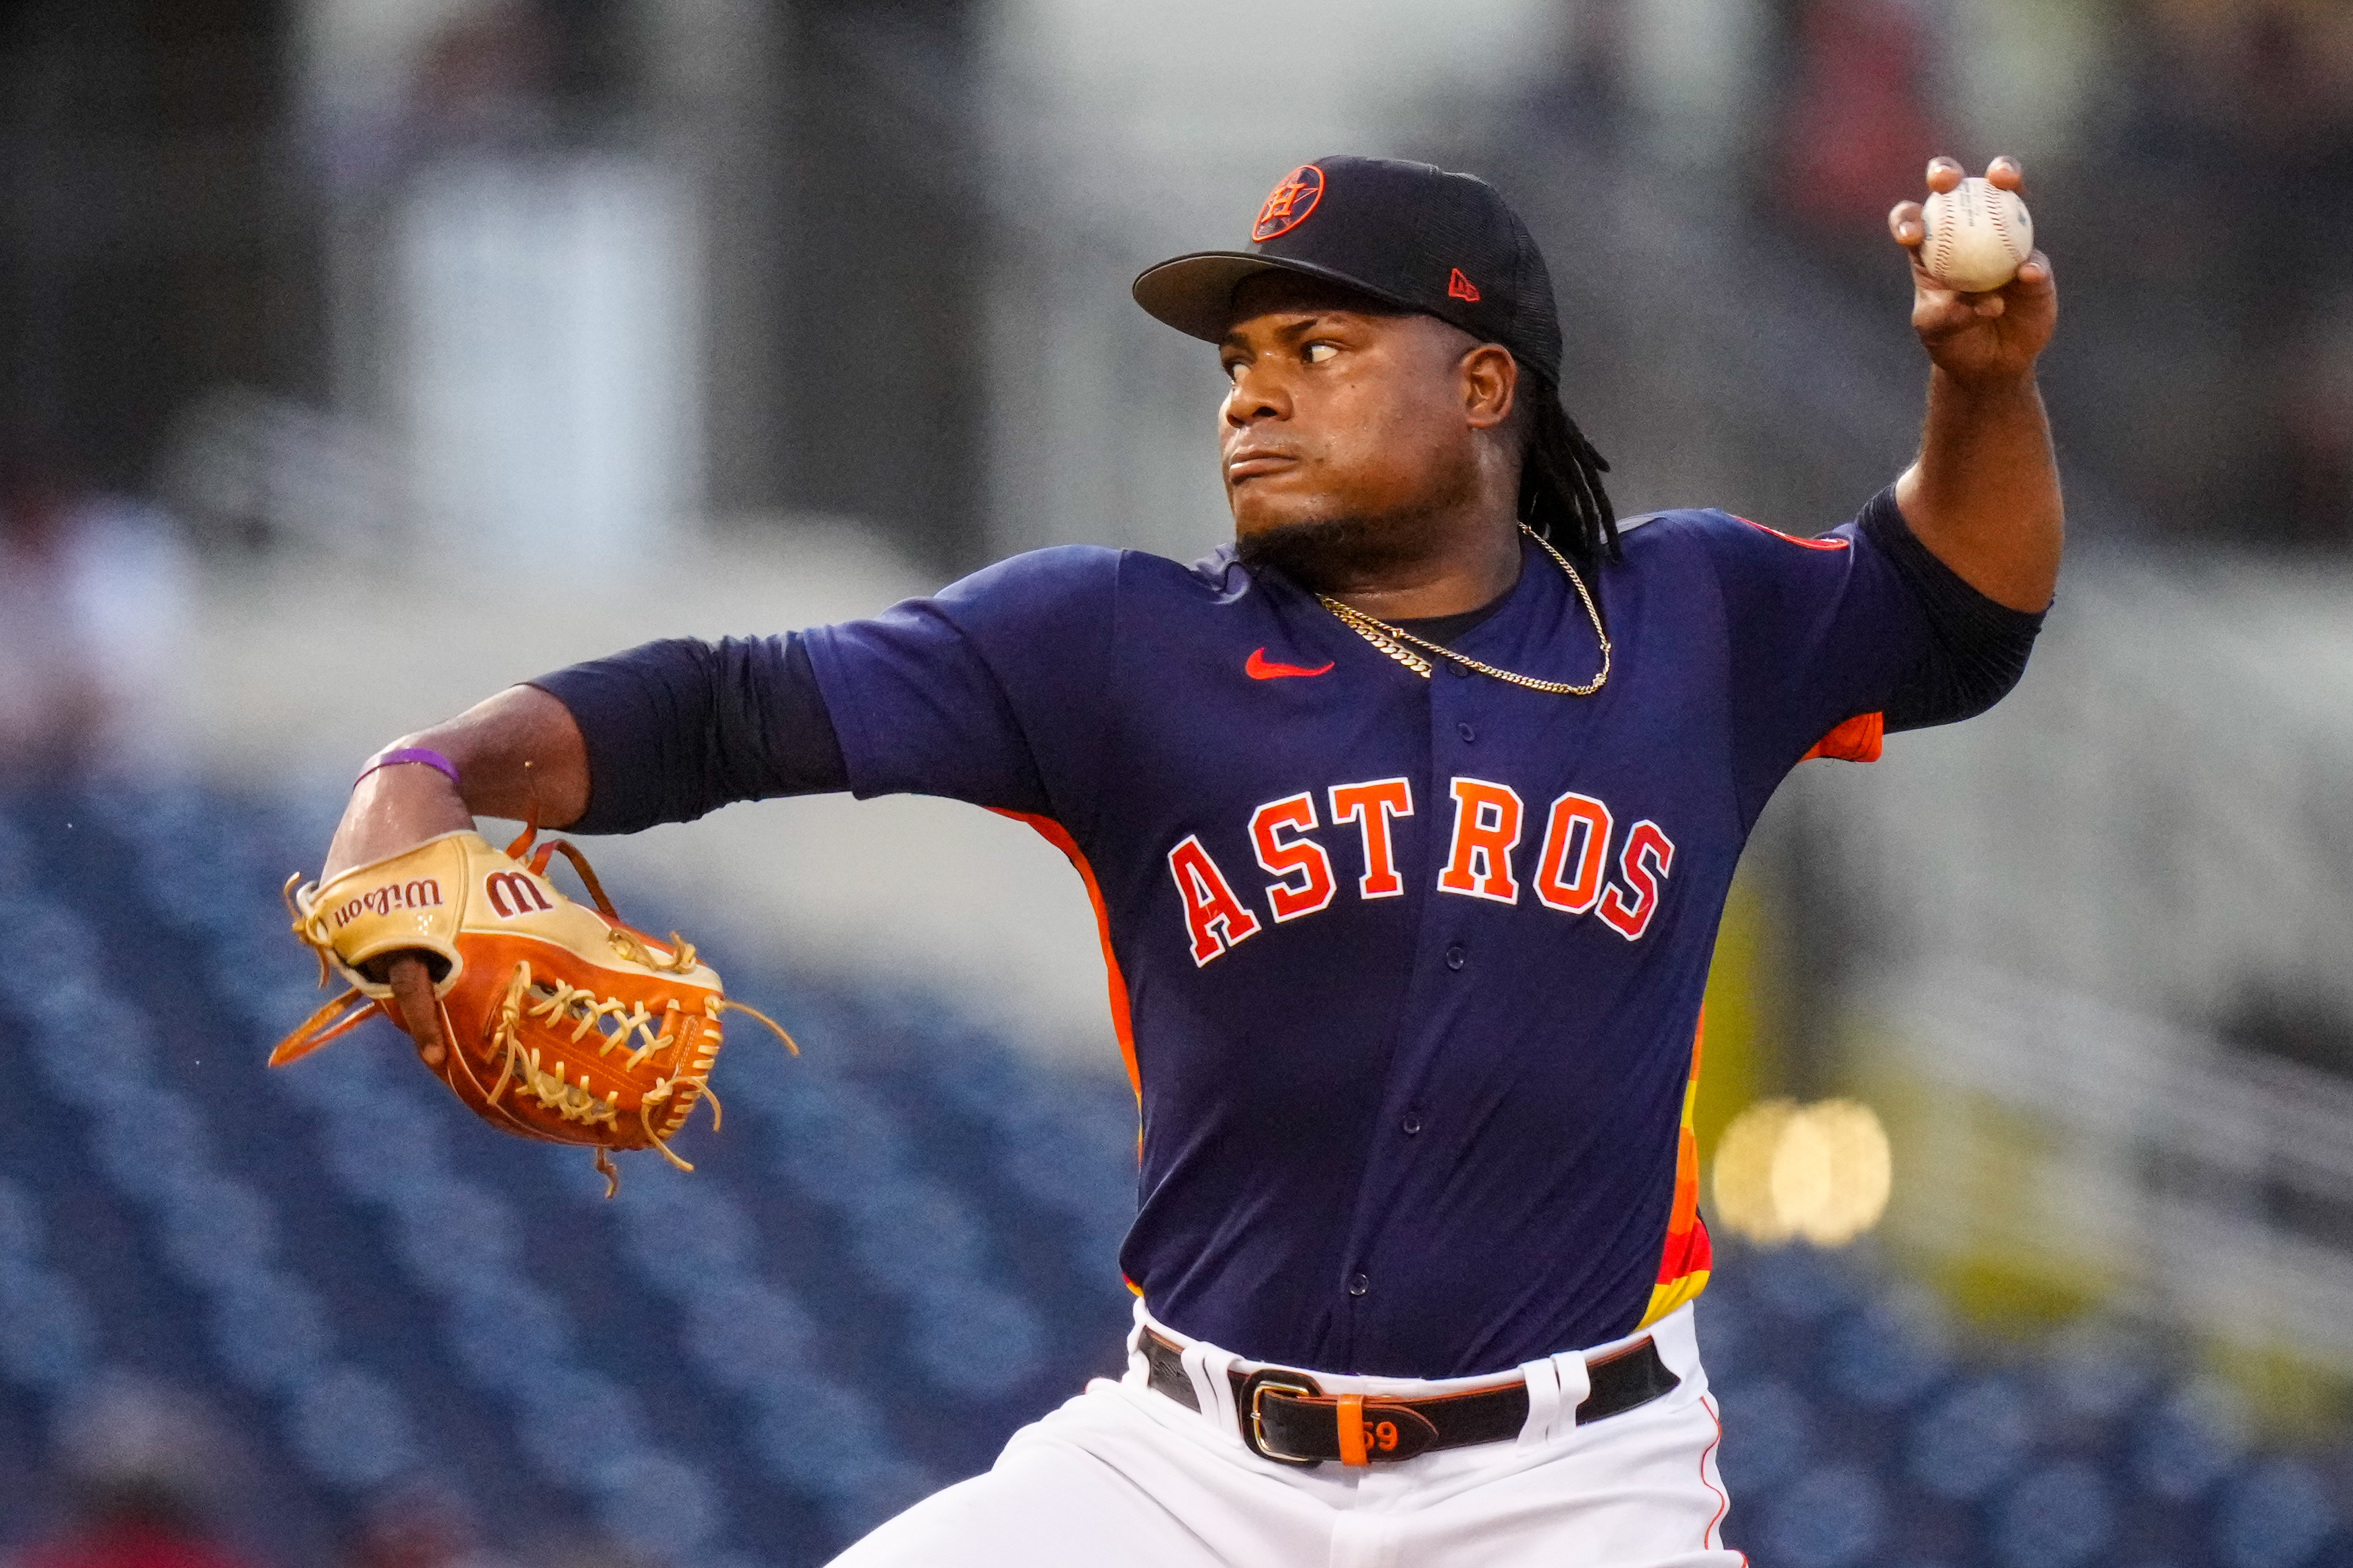 MLB Betting Guide: Odds, Best Bets For Today